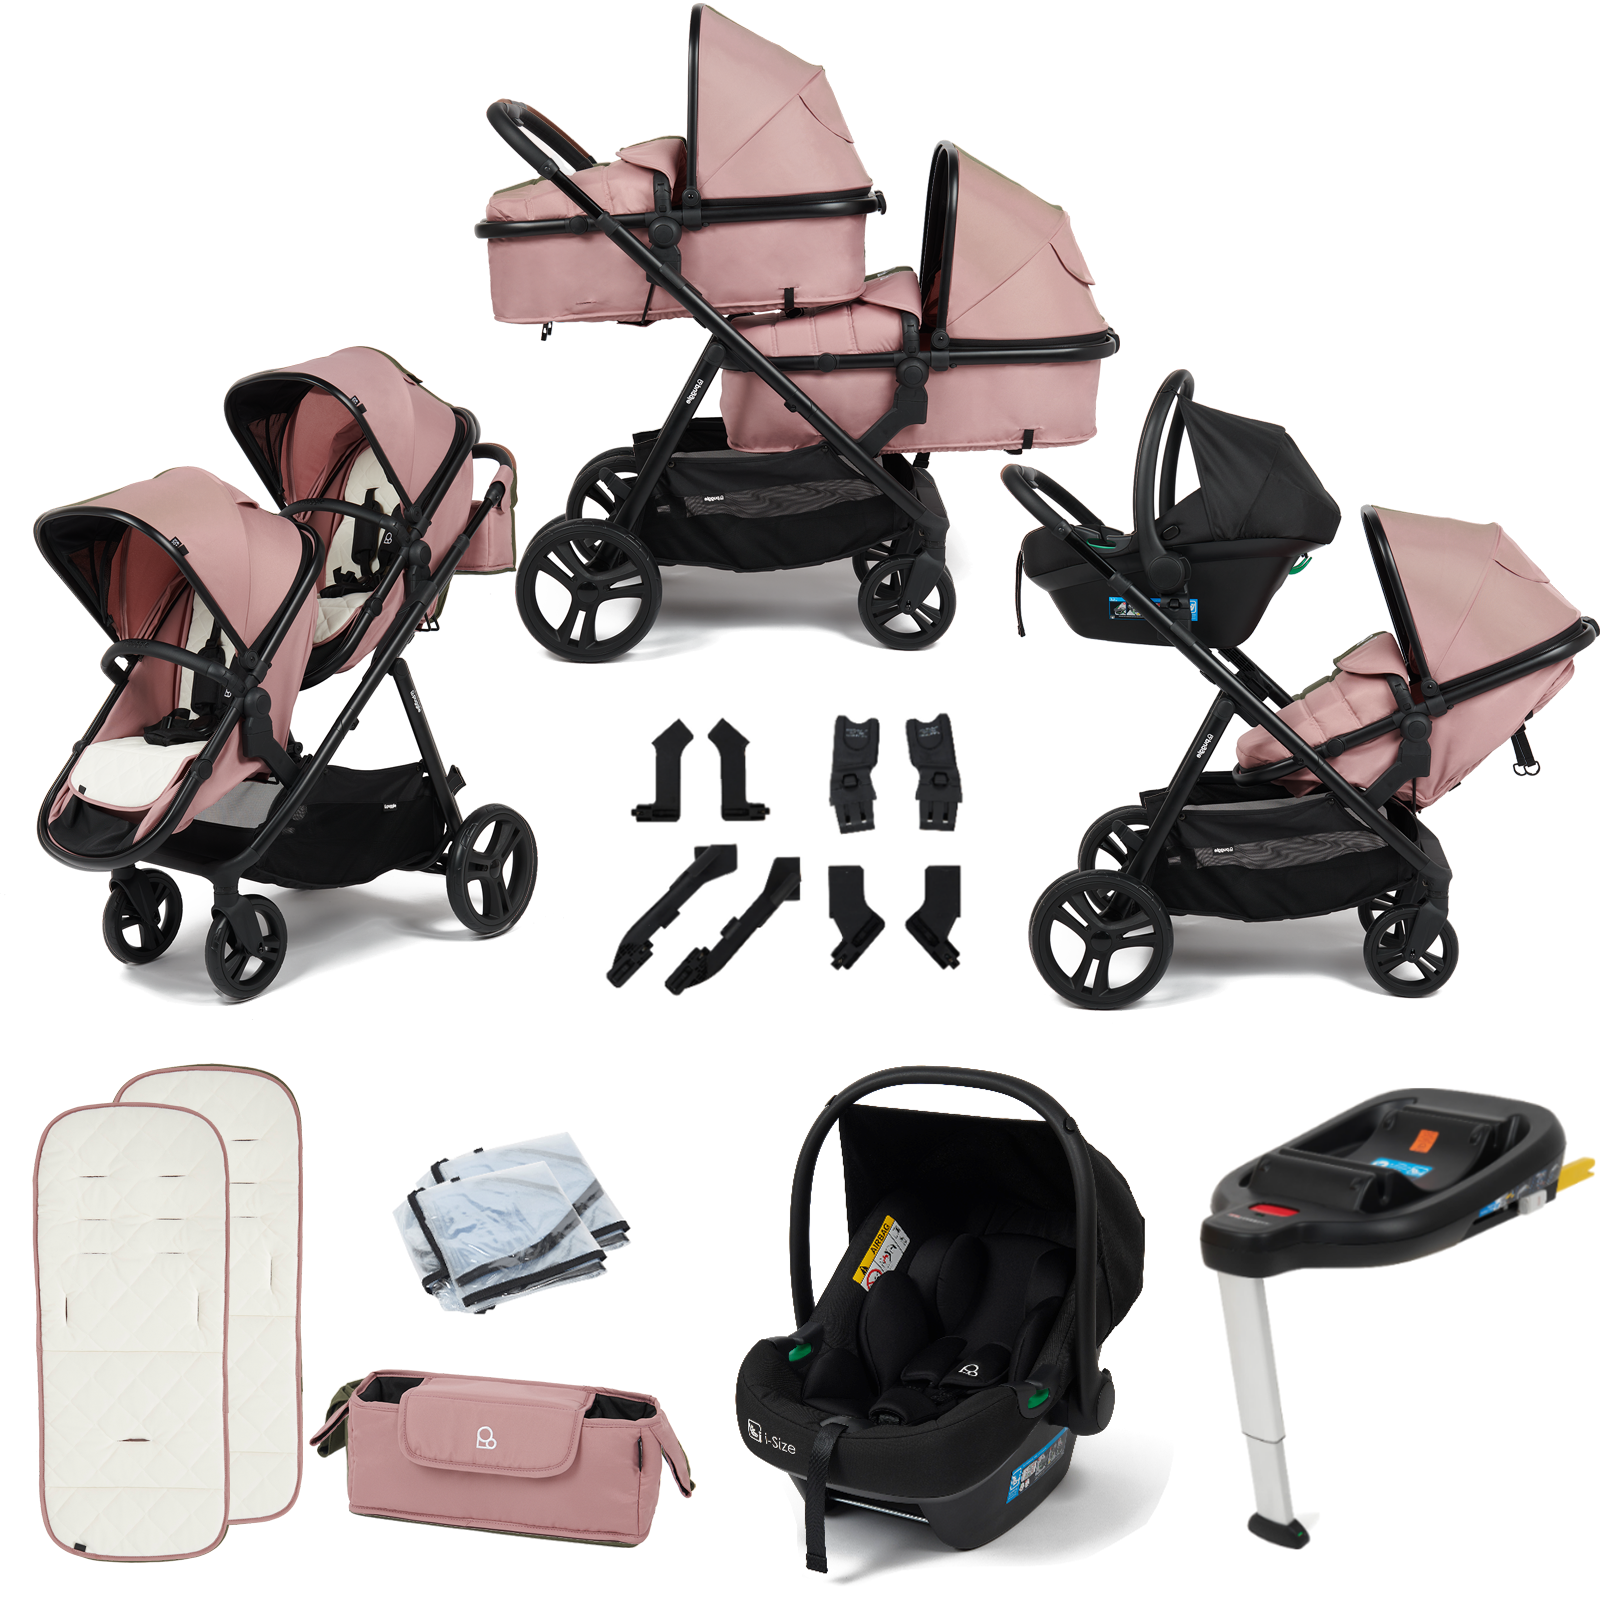 Puggle Memphis 2-in-1 Duo i-Size Double Twin Travel System with ISOFIX Base - Dusk Pink